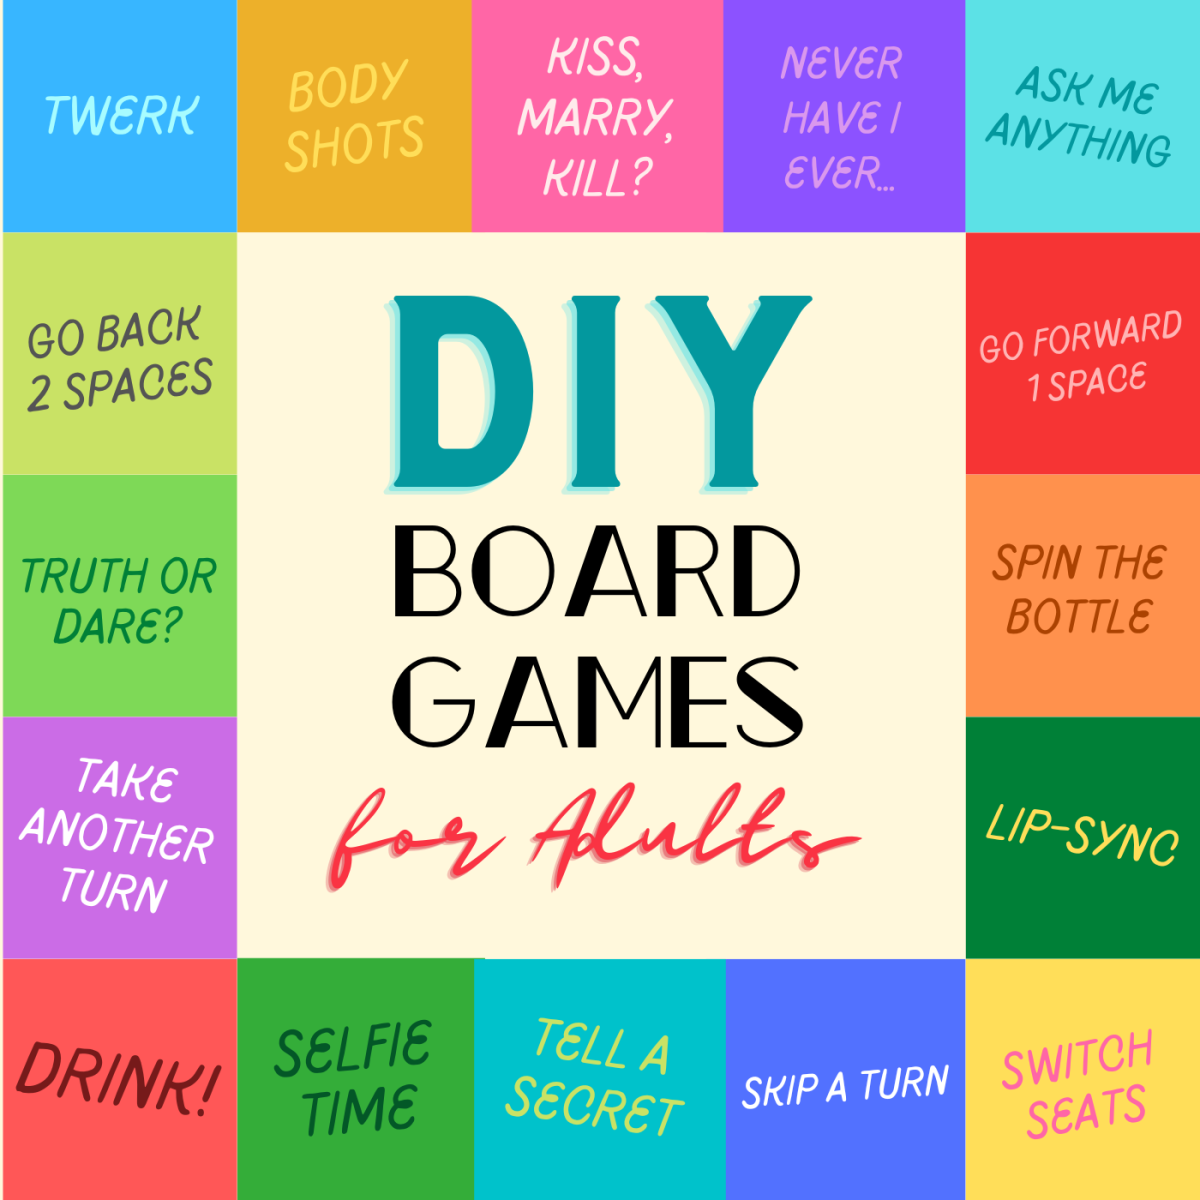 Check out some fun board games you can make for your next party, from giant Connect 4 to a naughty drinking game!